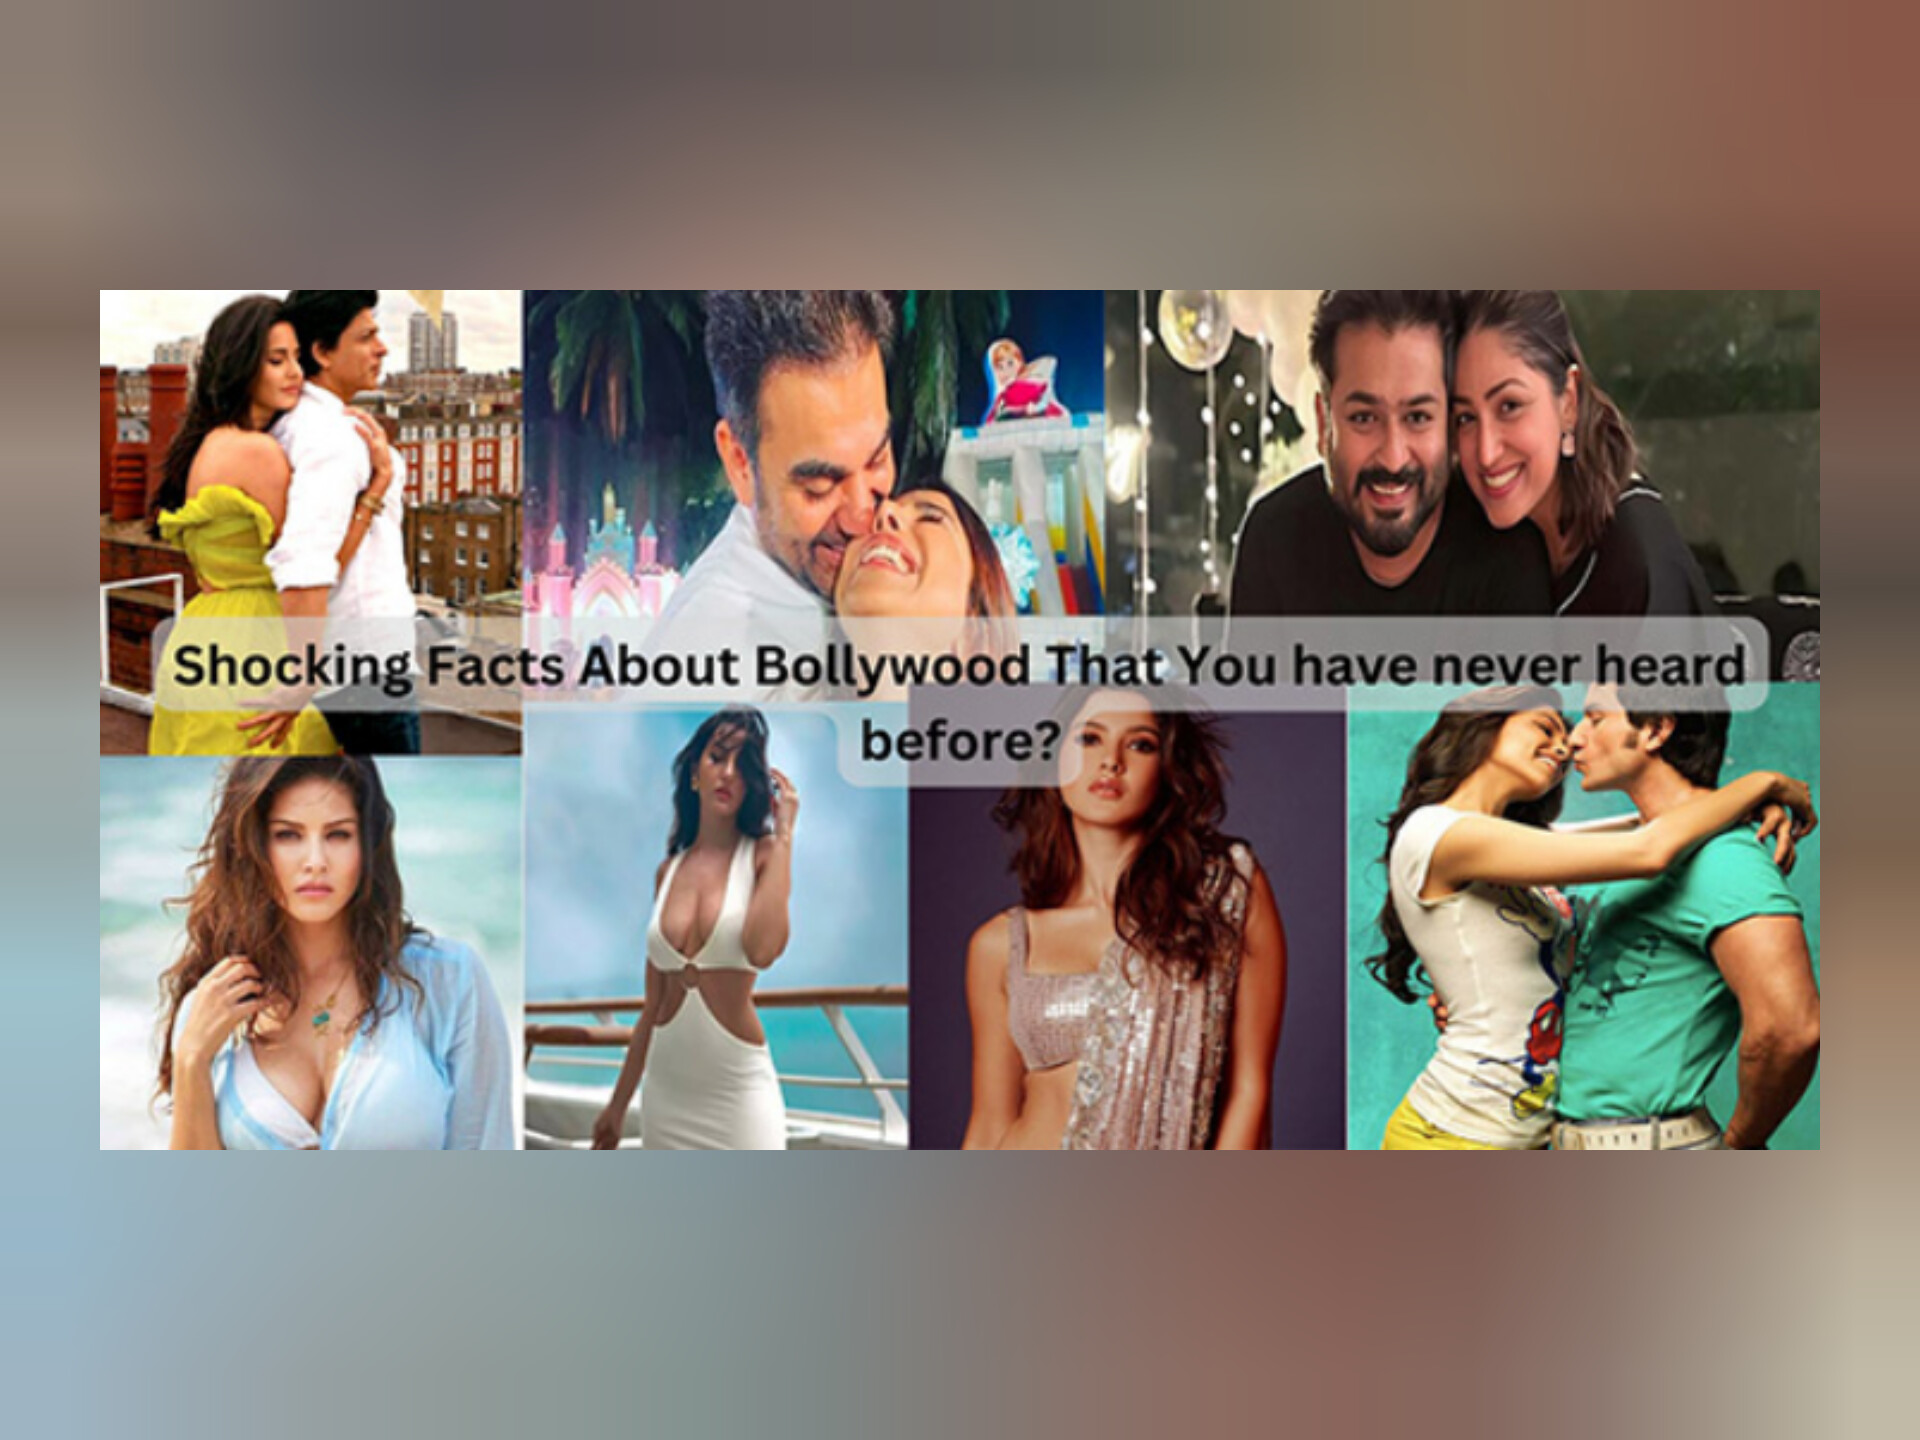 Shocking Facts about Bollywood that you never heard before